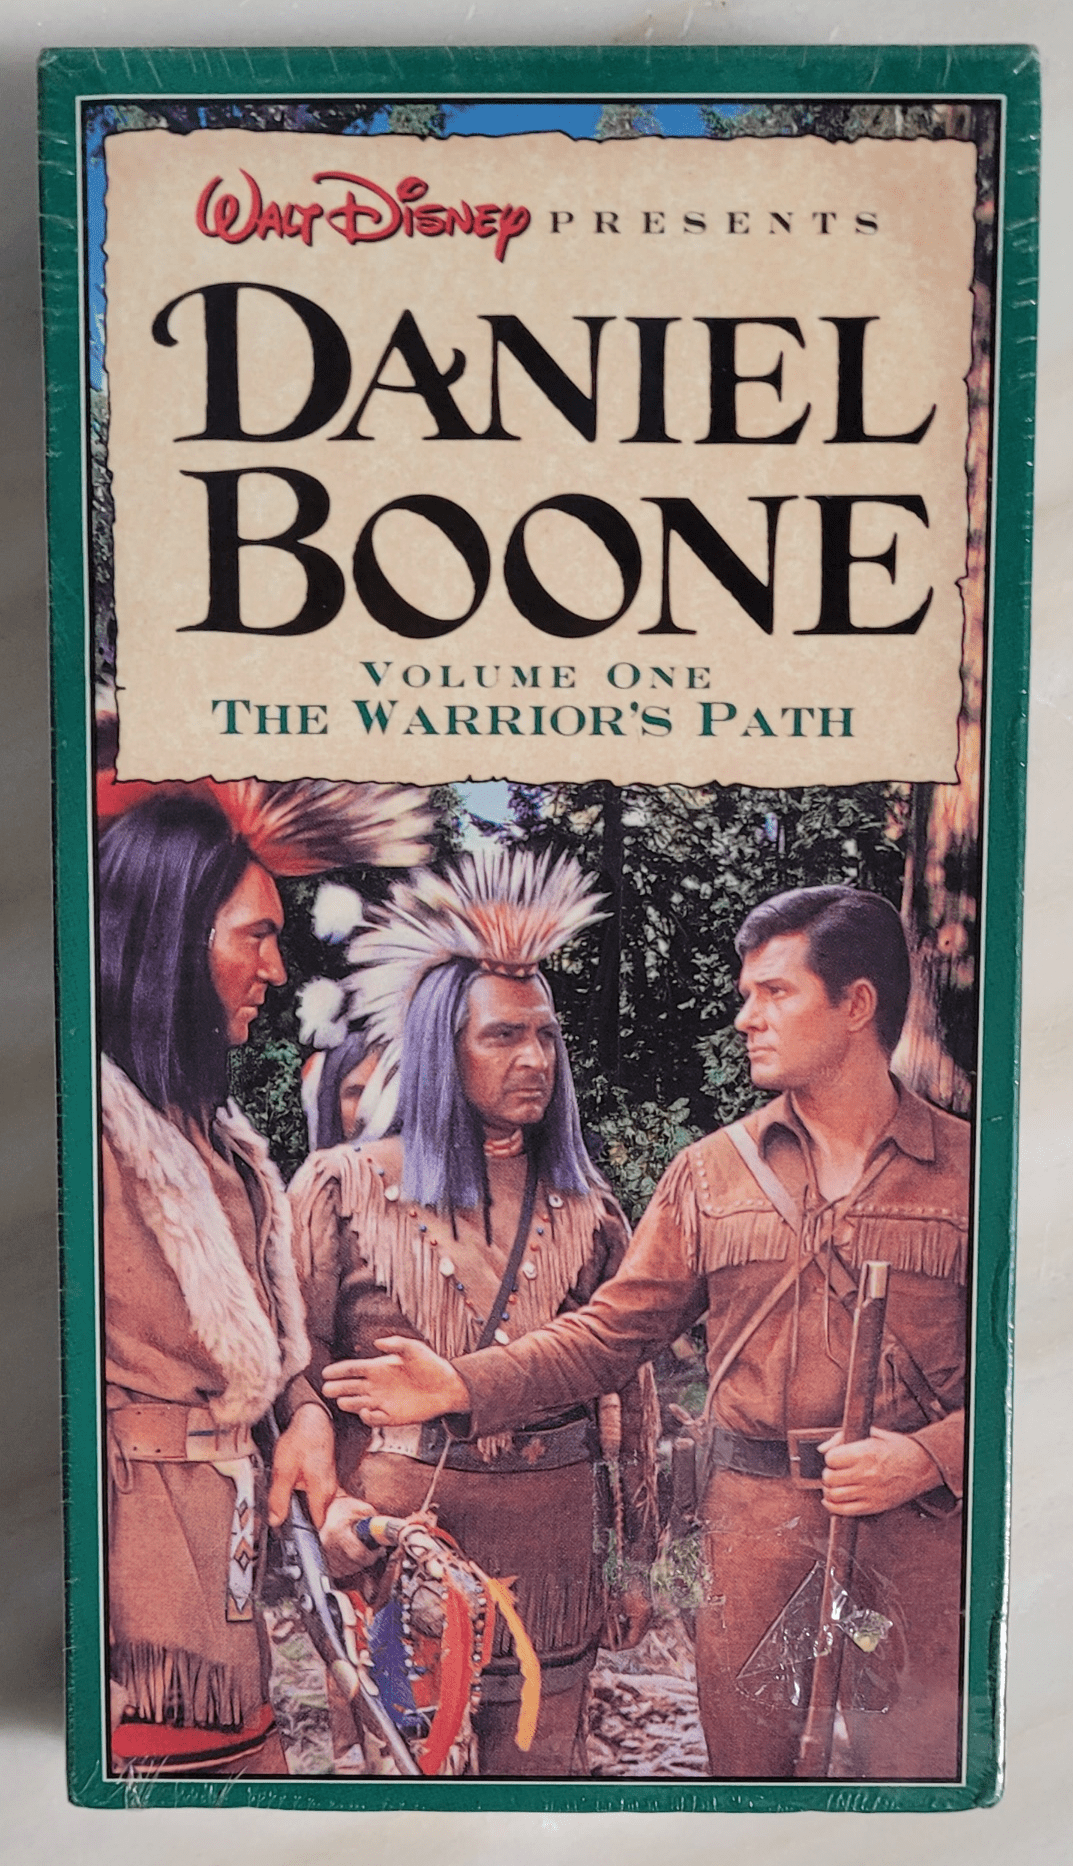 Daniel Boone Volume One The Warriors Path VHS - Front View